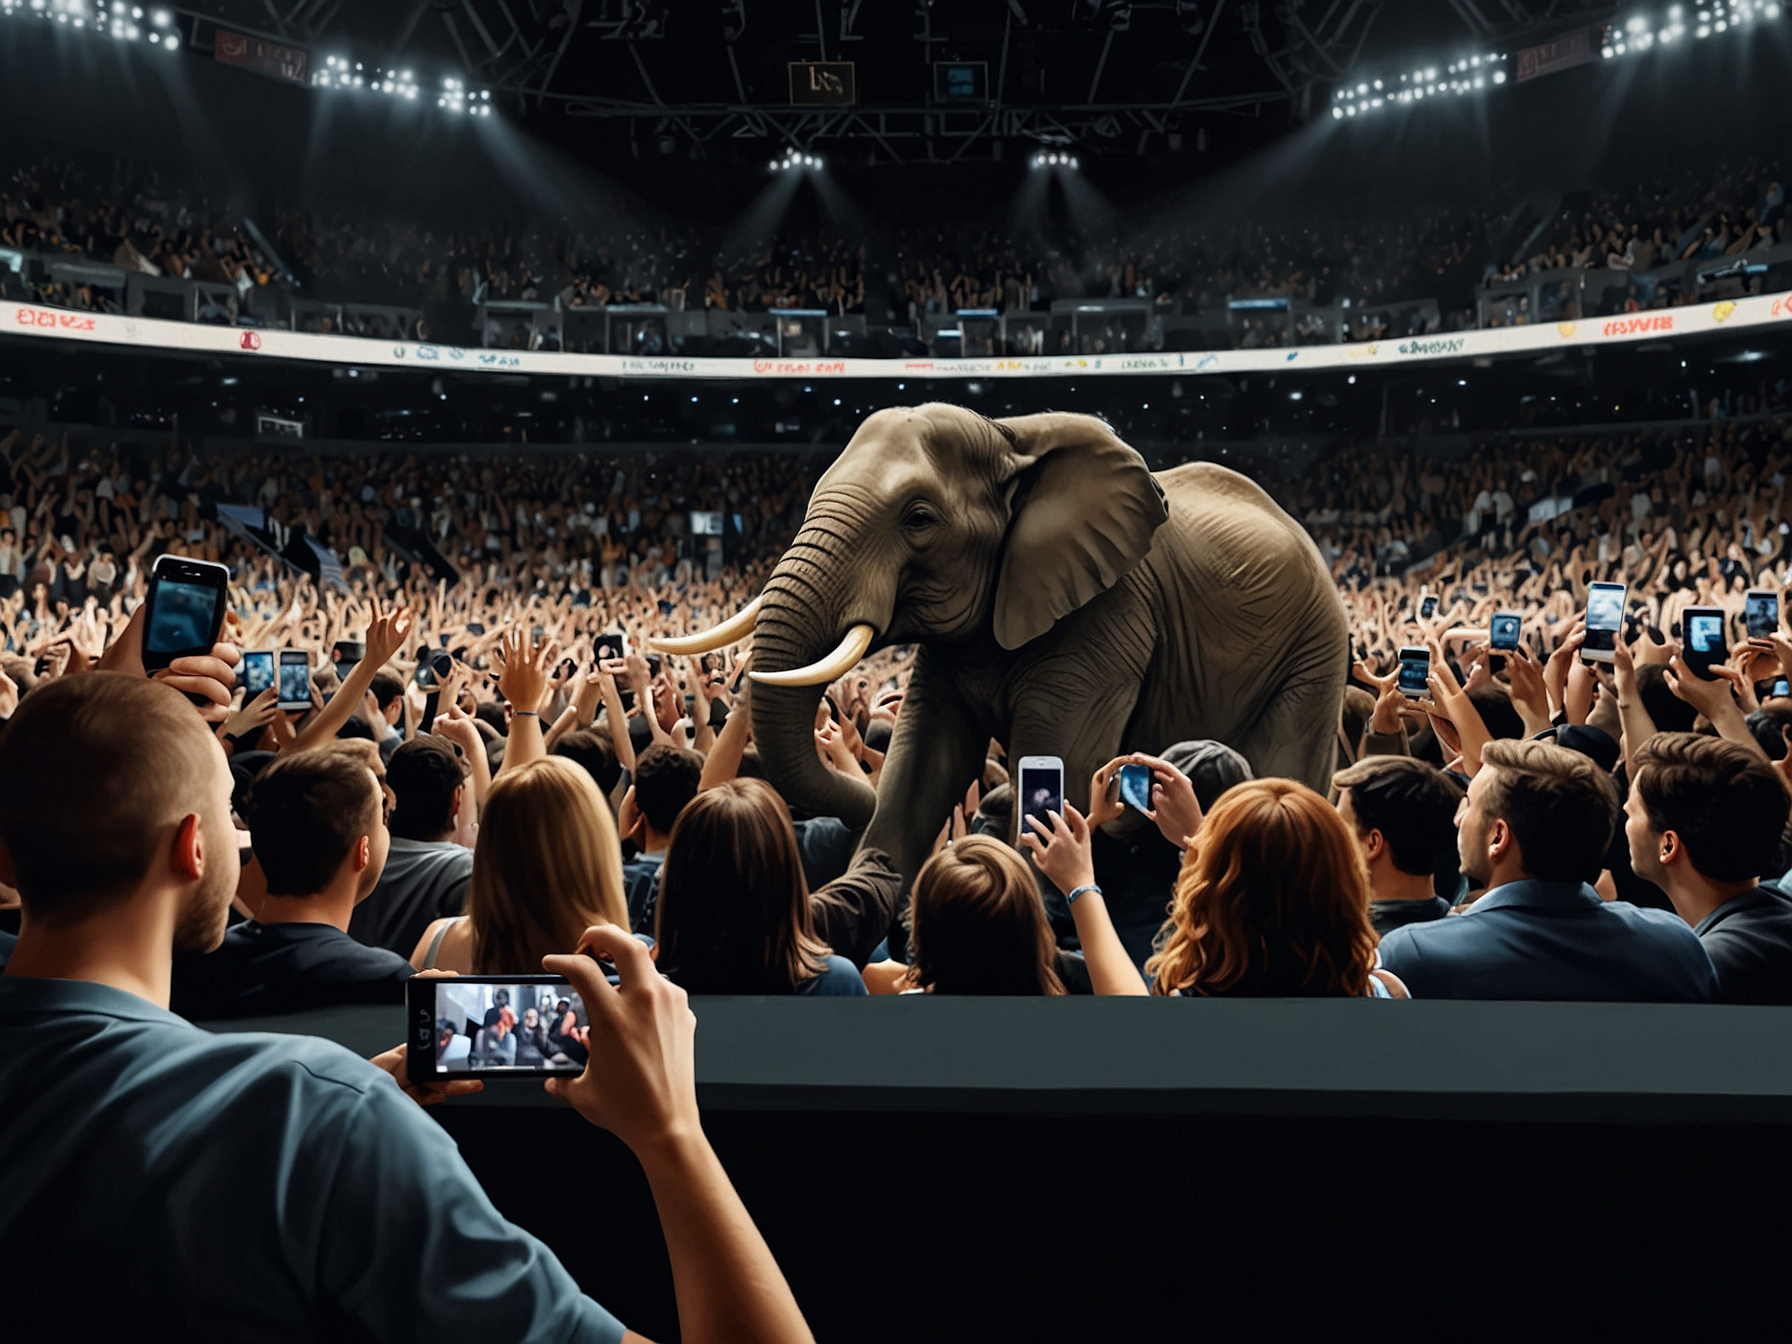 Fans at Barclays Center cheering and recording Ellie the Elephant’s performance on their phones, with social media quickly flooding with videos and positive comments about the tribute.